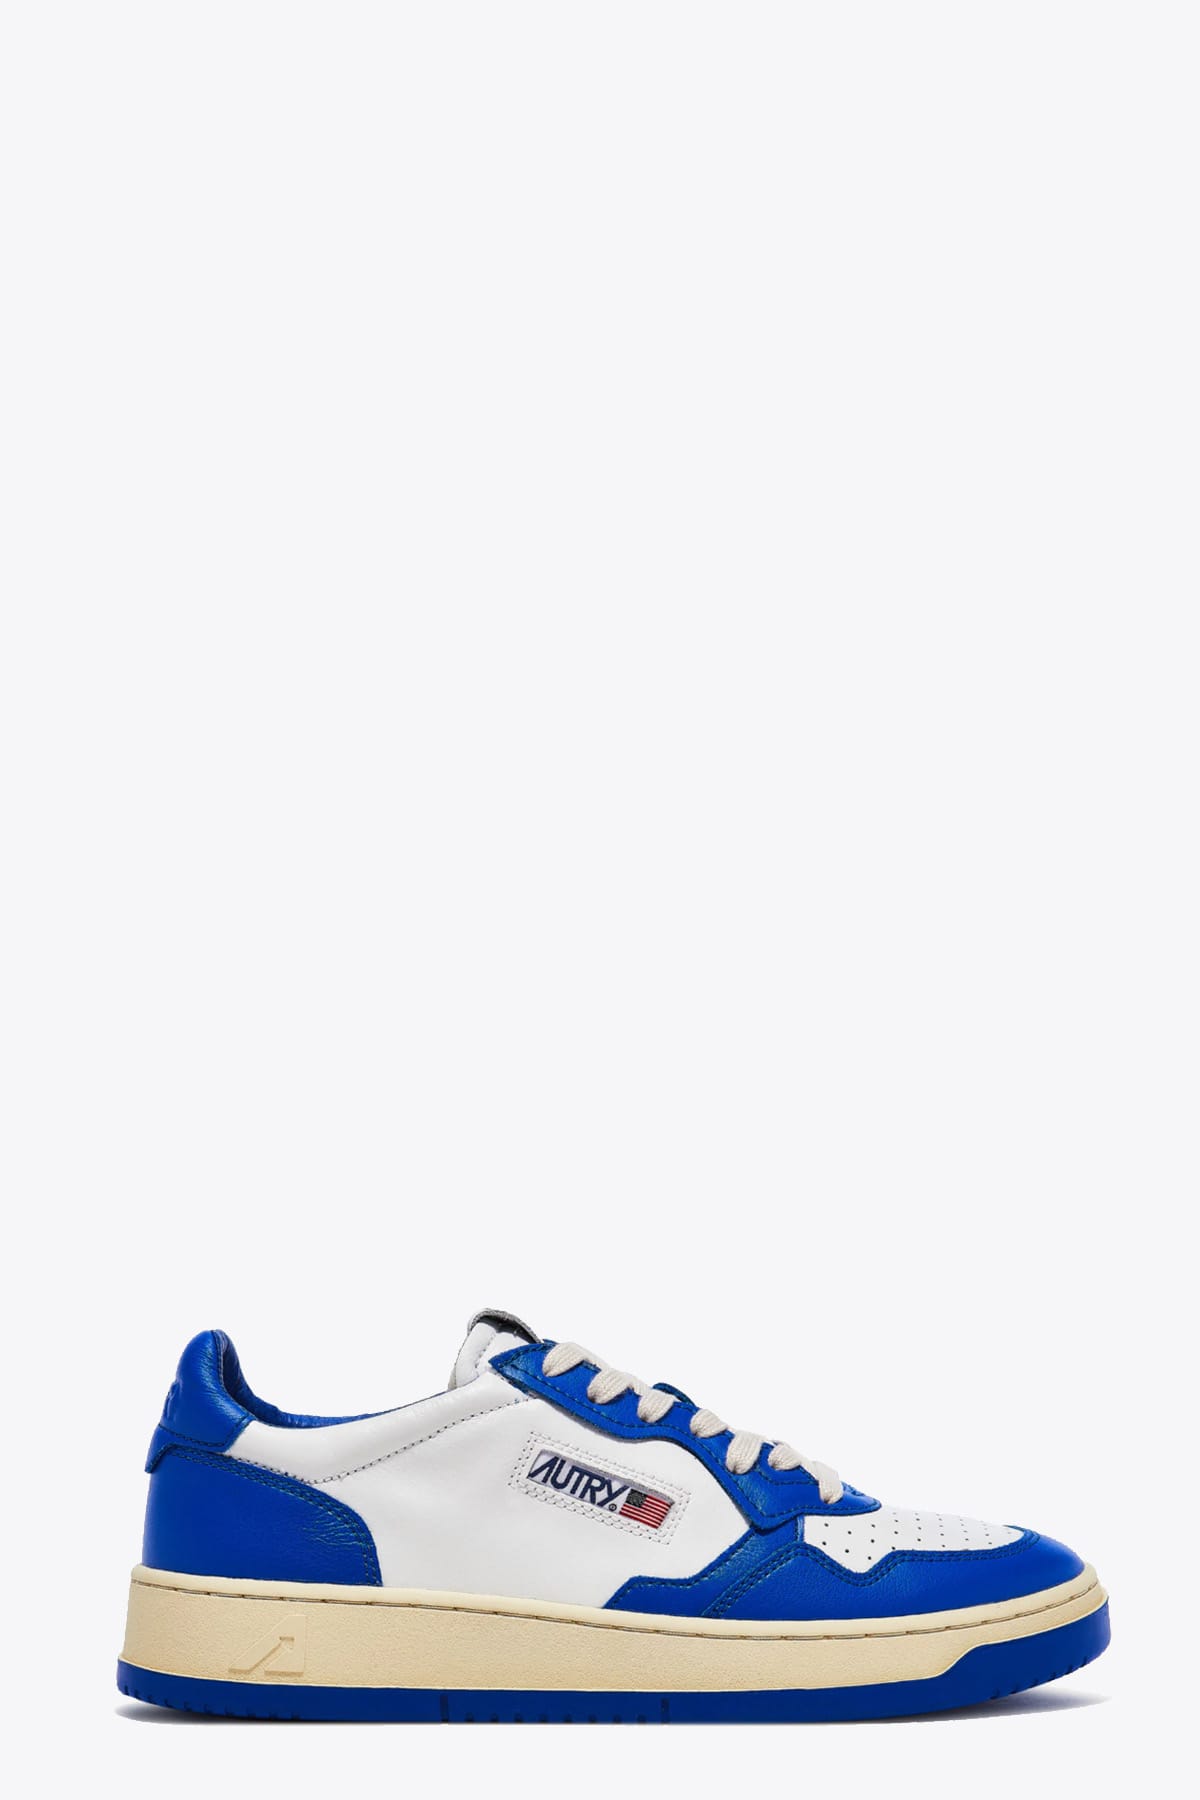 Autry 01 Low Man Leat Princess Blue White and royal blue leather low sneaker - Medalist